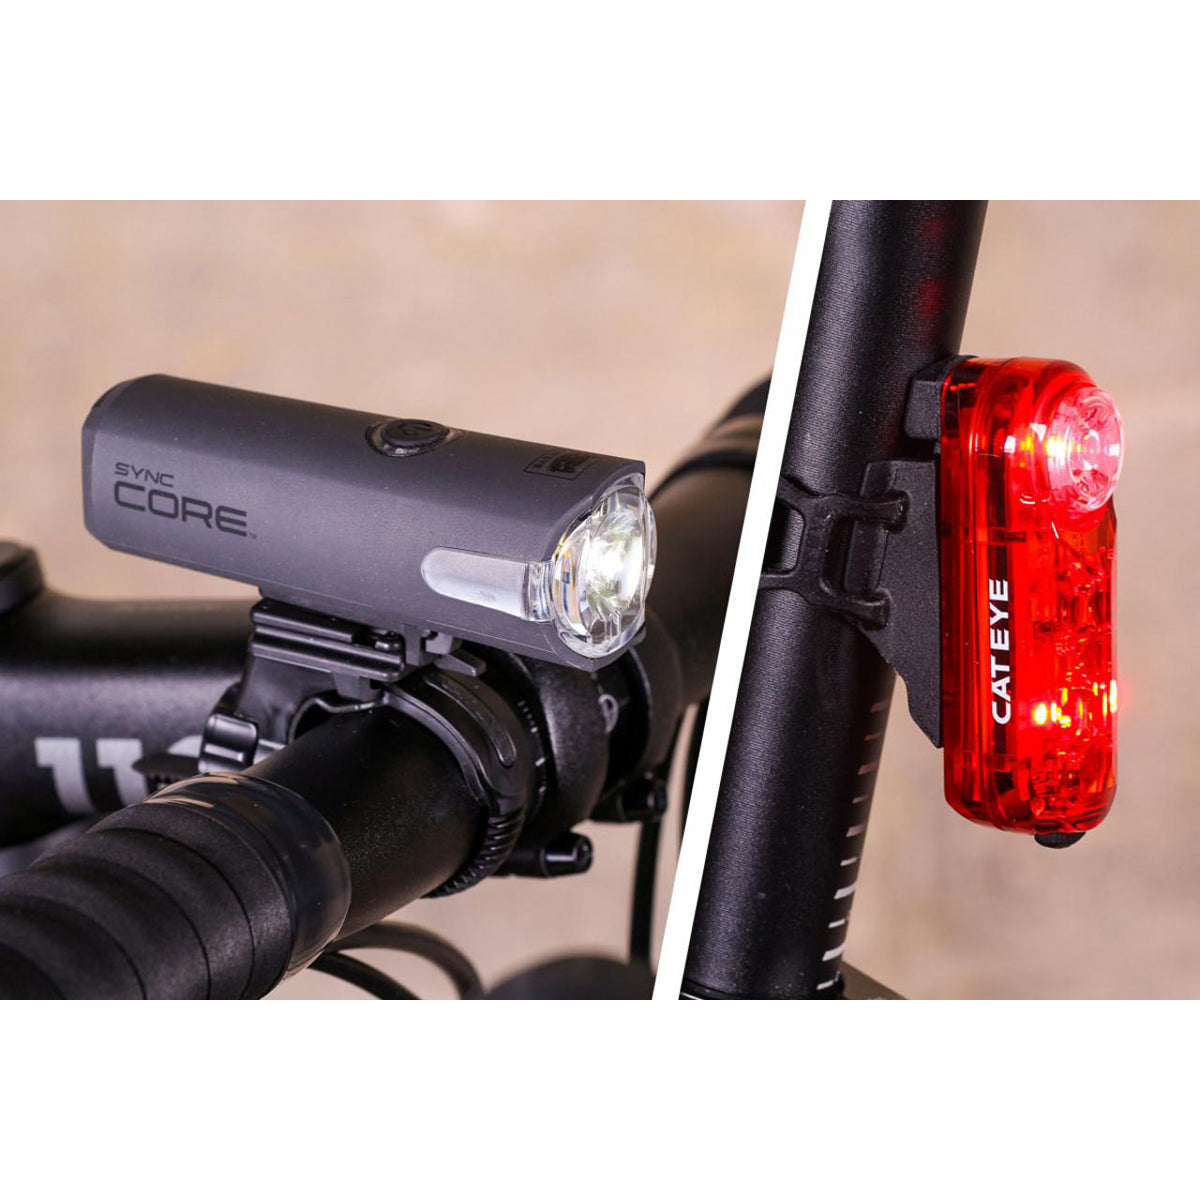 CatEye Sync Core and Kinetic Bicycle Light Kit - NW100RC/NW100K Set CatEye